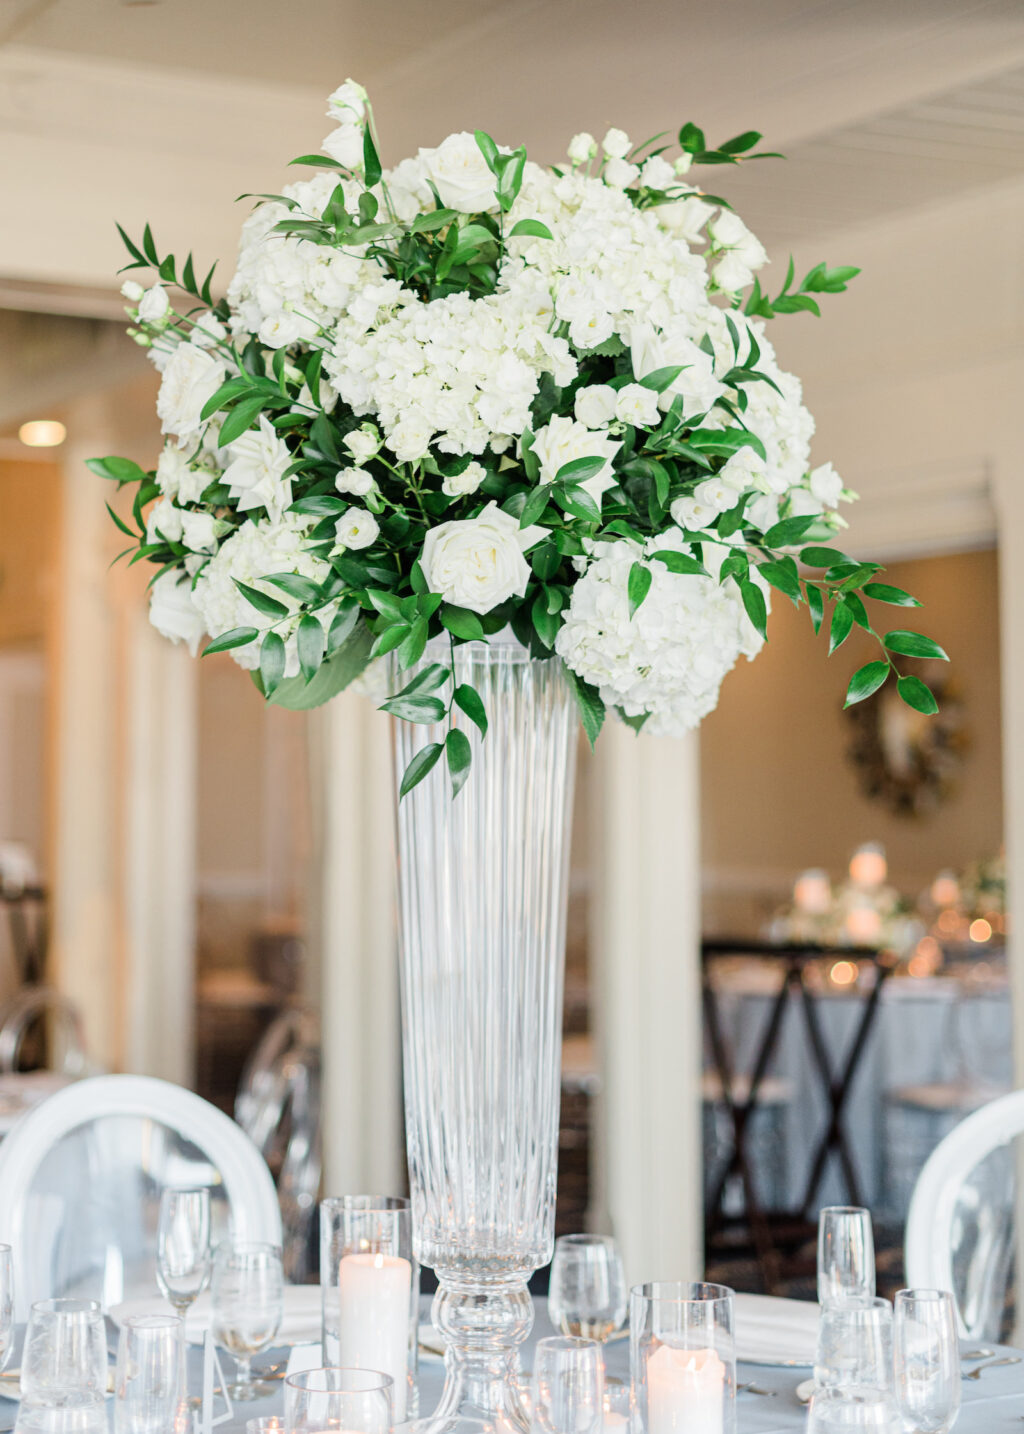 Elegant Light Blue and White Clearwater Wedding with White and Clear Ghost Chairs | Clearwater Beach Wedding Planner Parties A'La Carte | Clearwater Wedding Florist Bruce Wayne Florals | Carlouel Yacht Club